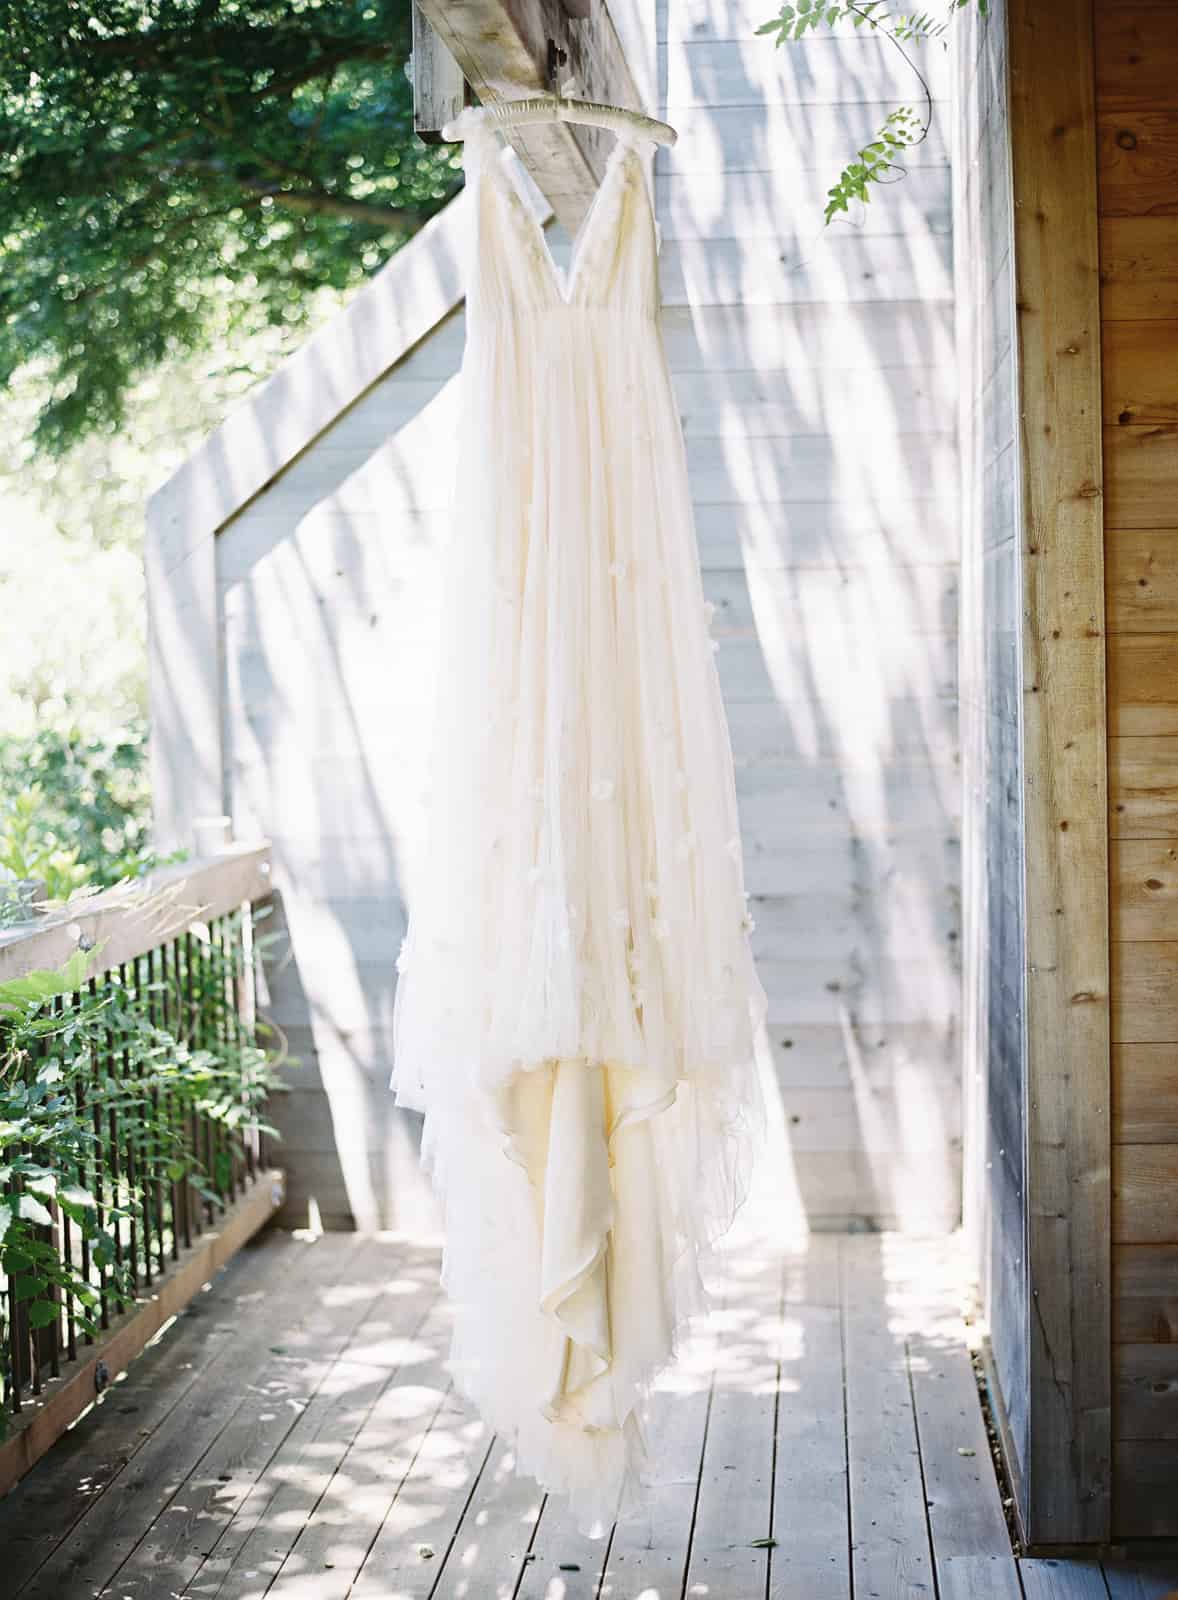 samuelle couture dress hanging